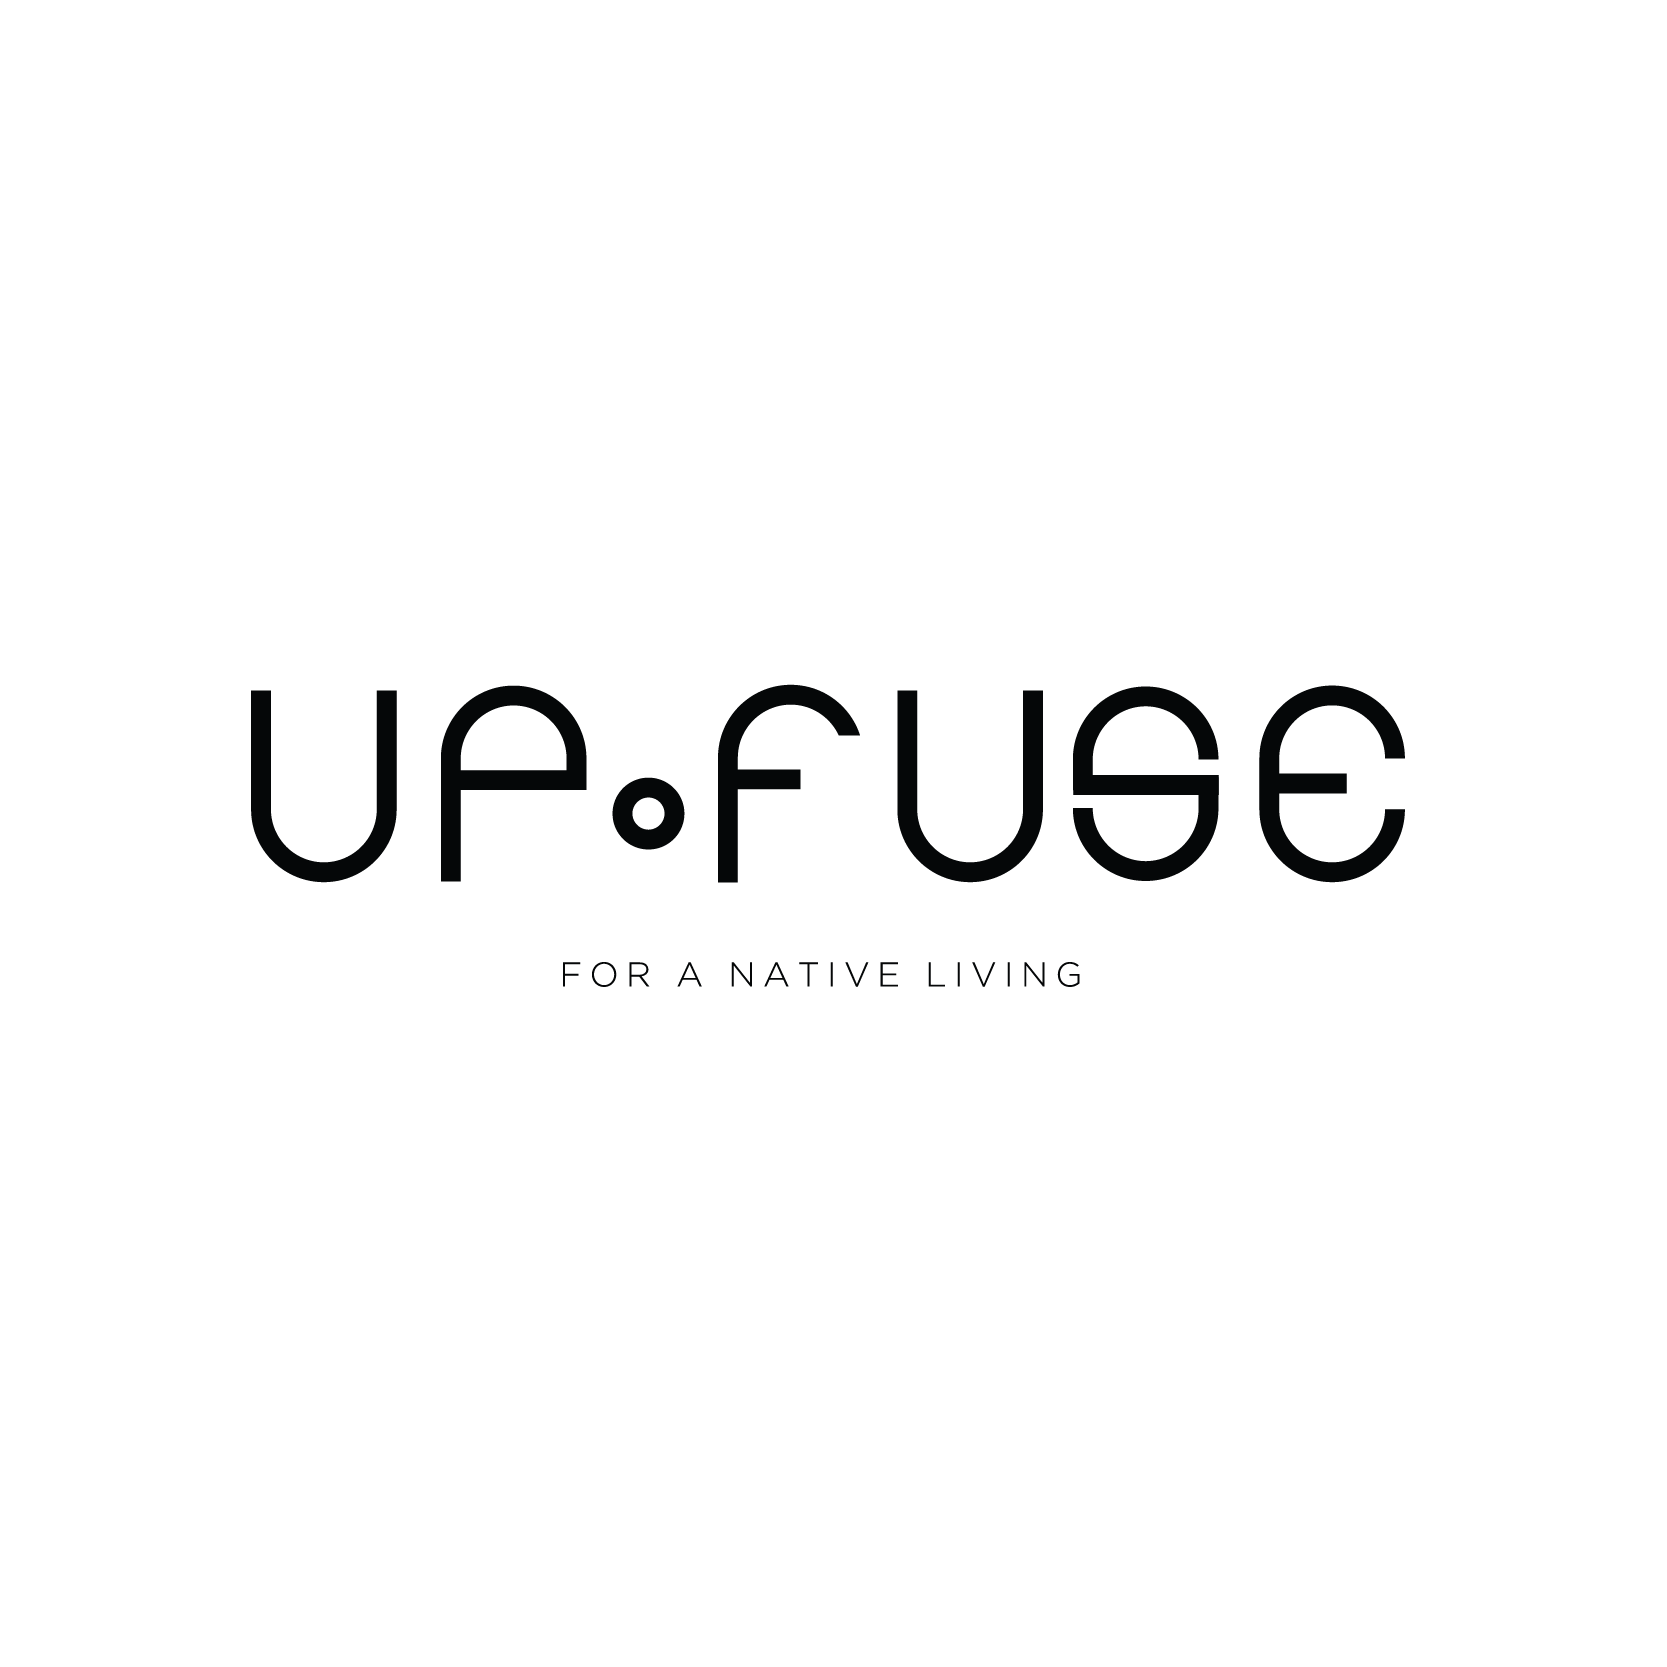 Up-Fuse